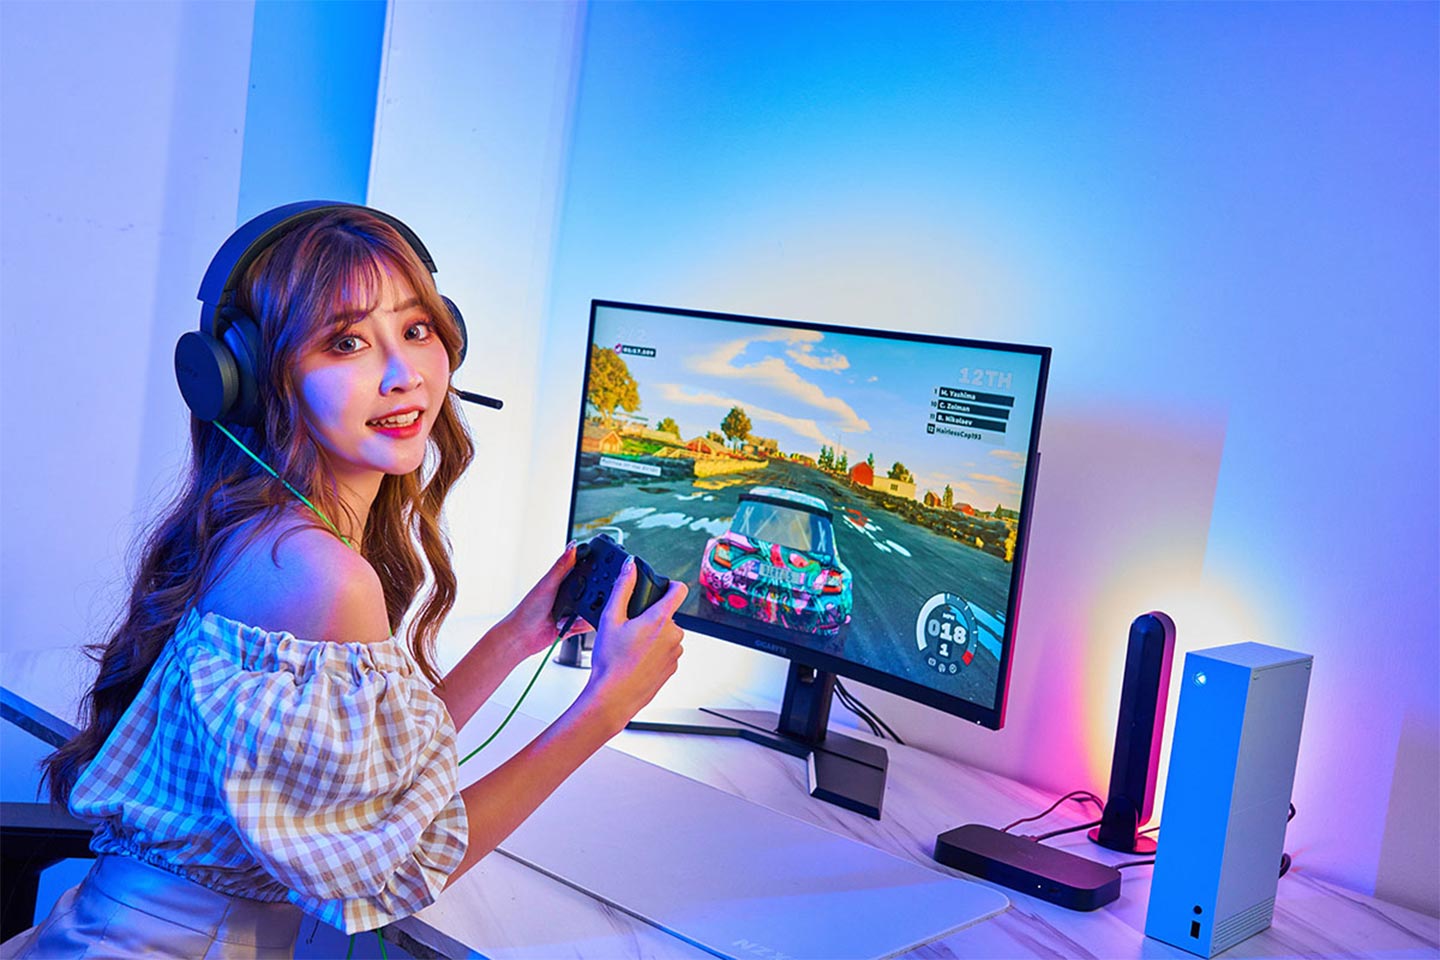 Compared with simply focusing on the game screen presented on the monitor, the Philips Hue Play gradient full-color ambient computer light strip can create a spatial lighting effect that 